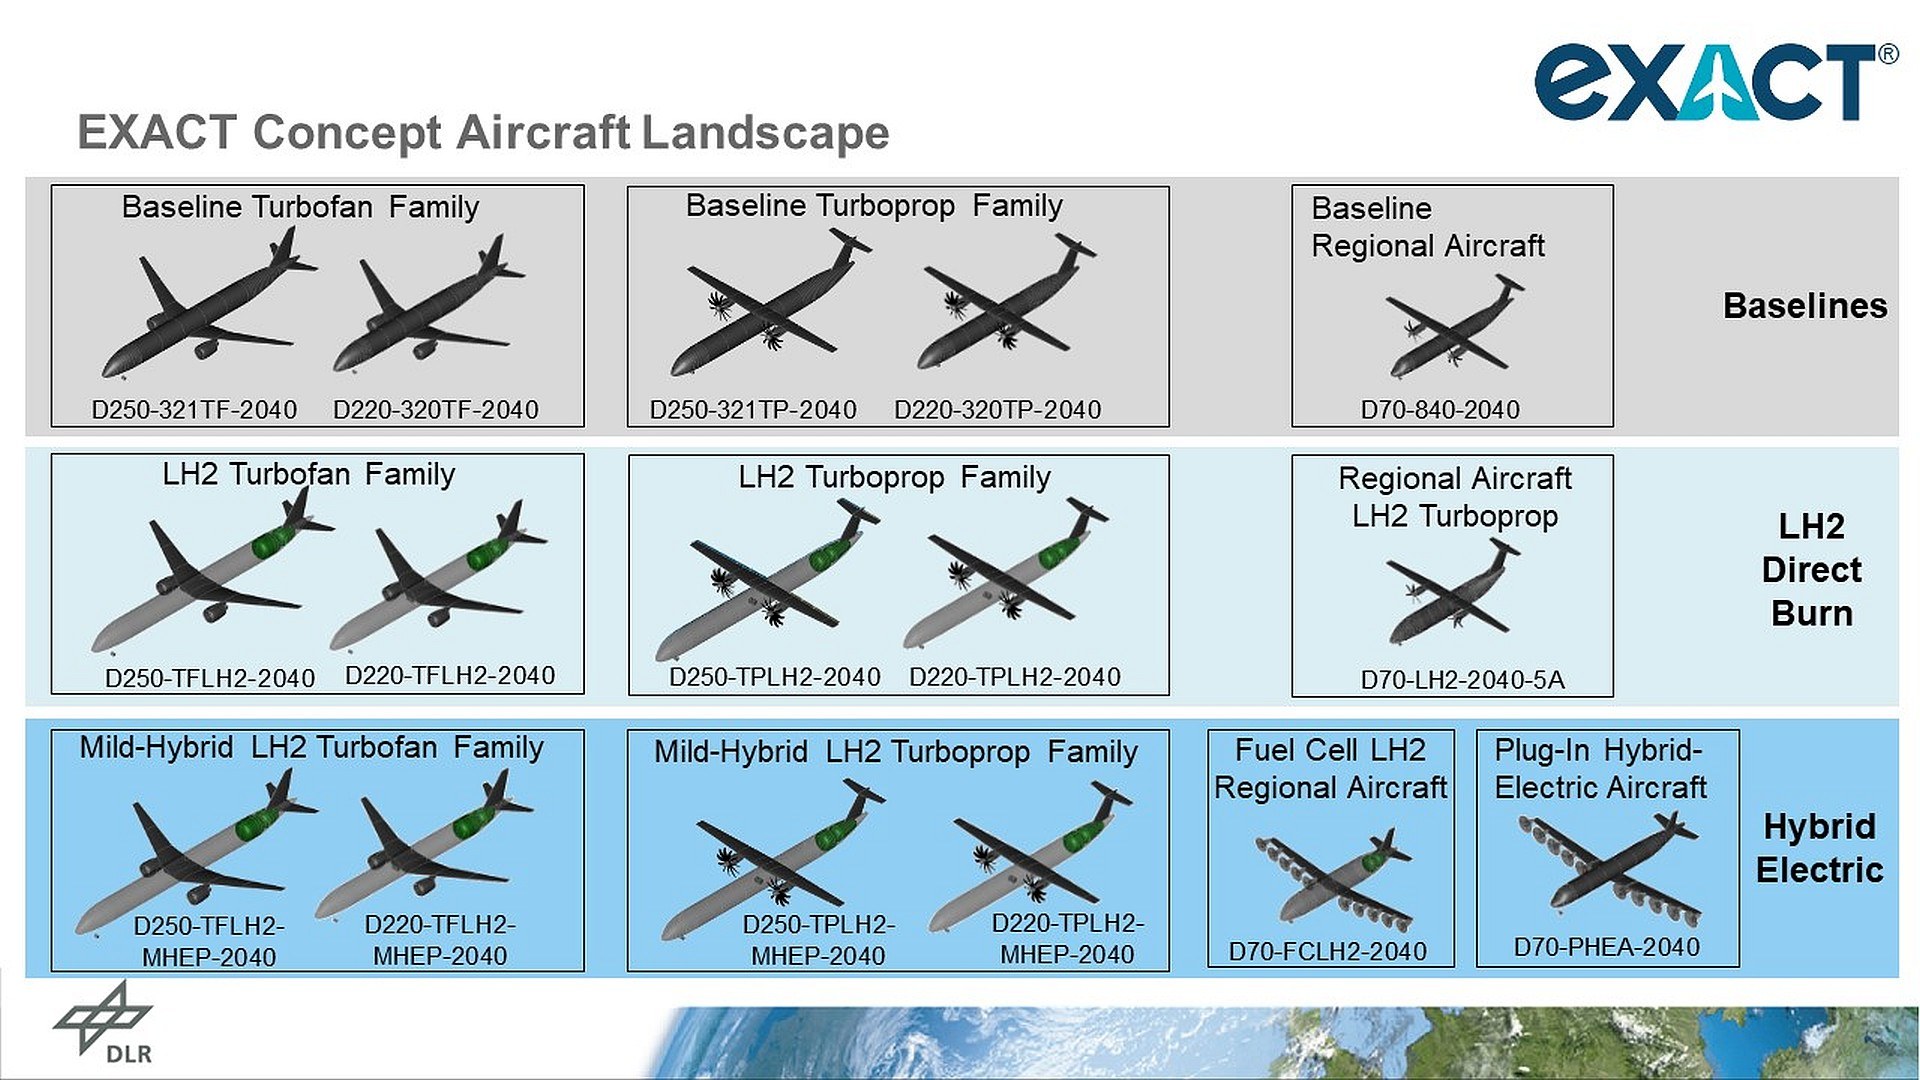 Overview of climate-neutral aircraft concepts